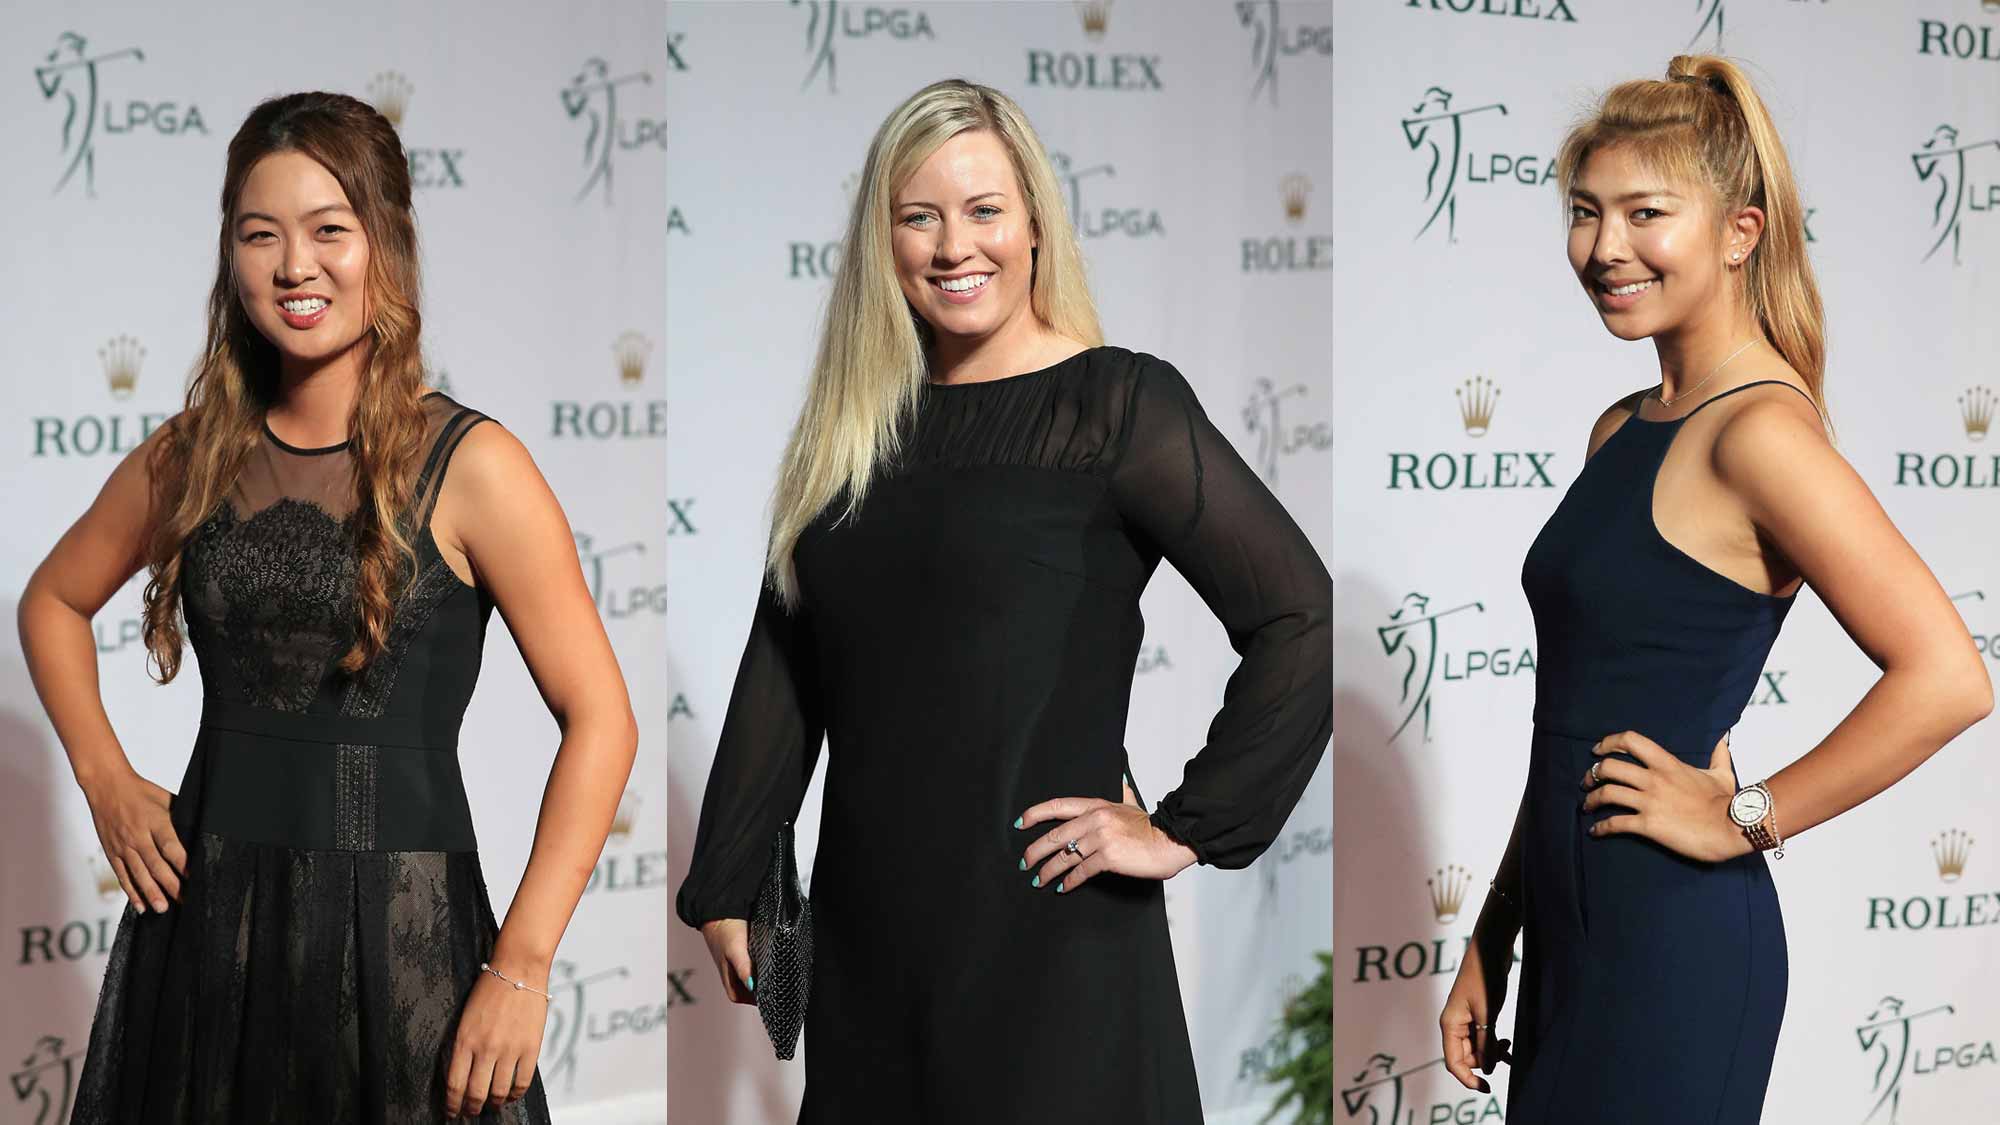 Minjee Lee (L), Brittany Lincicome (Center) and Alison Lee on the Red Carpet before the LPGA Rolex Players Awards at the Ritz-Carlton, Naples